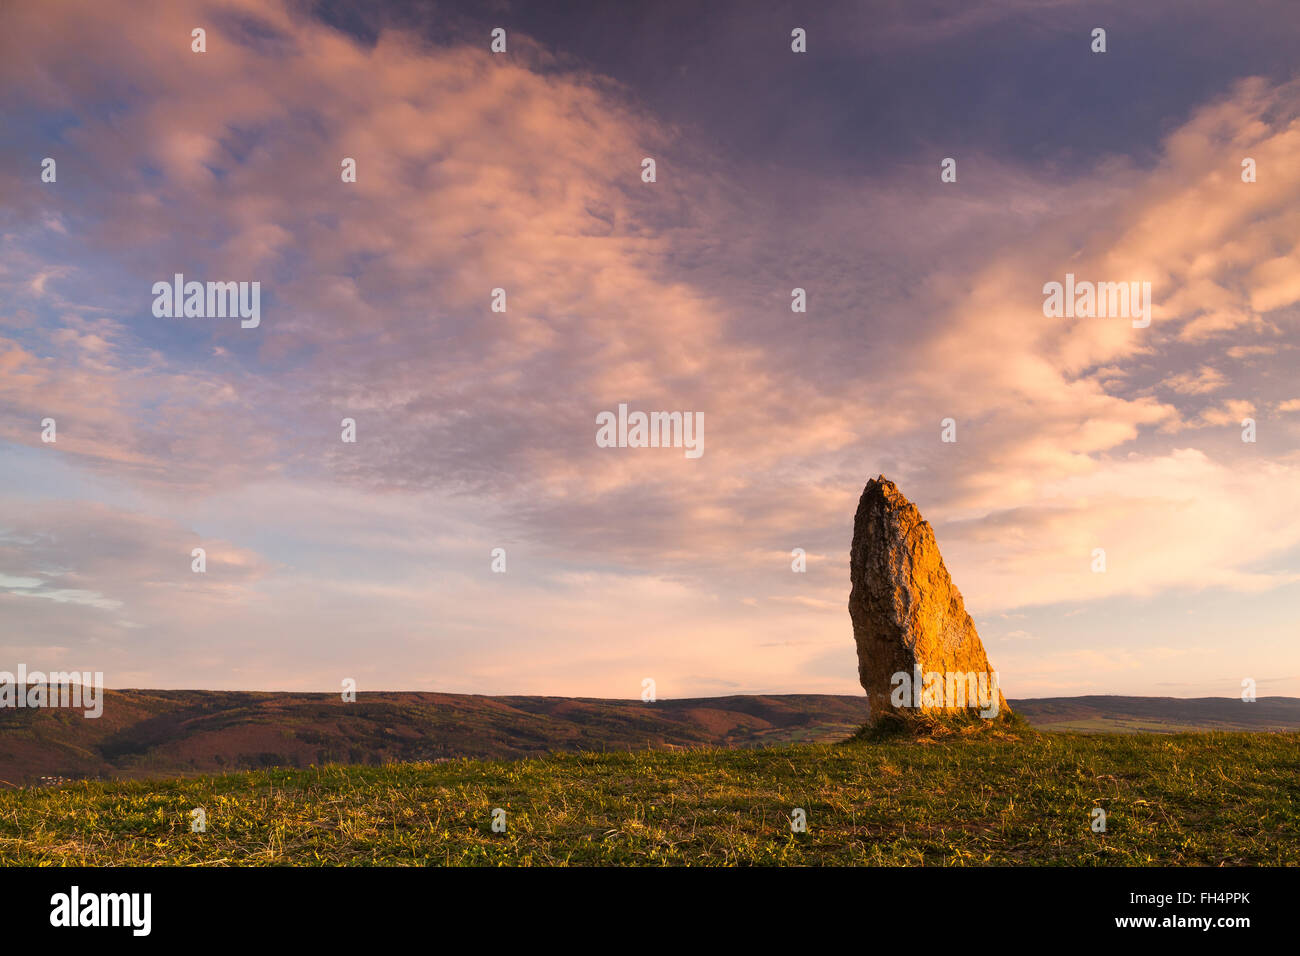 Menhir on the hill at sunset in Morinka village, Czech Republic Stock Photo